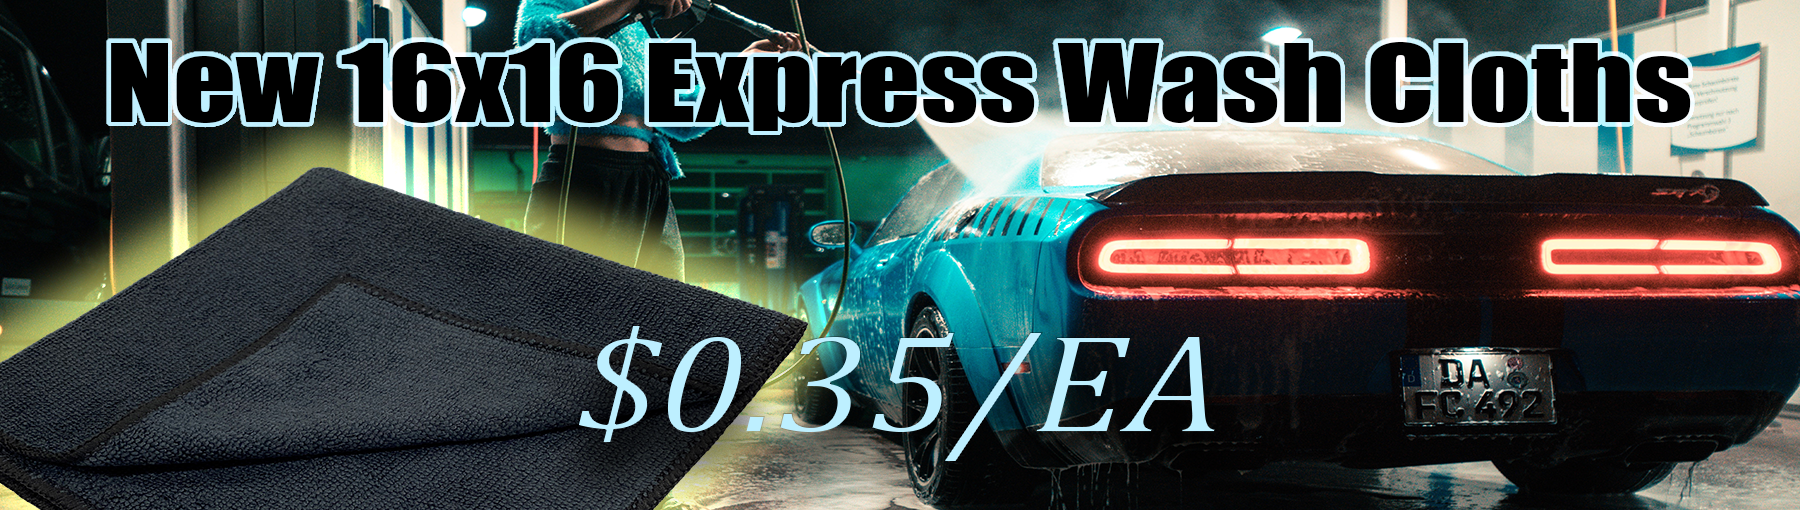 New 16x16 Express Wash Cloths for Car Washes. Just $0.35 each. By Car Washes, for Car Washes